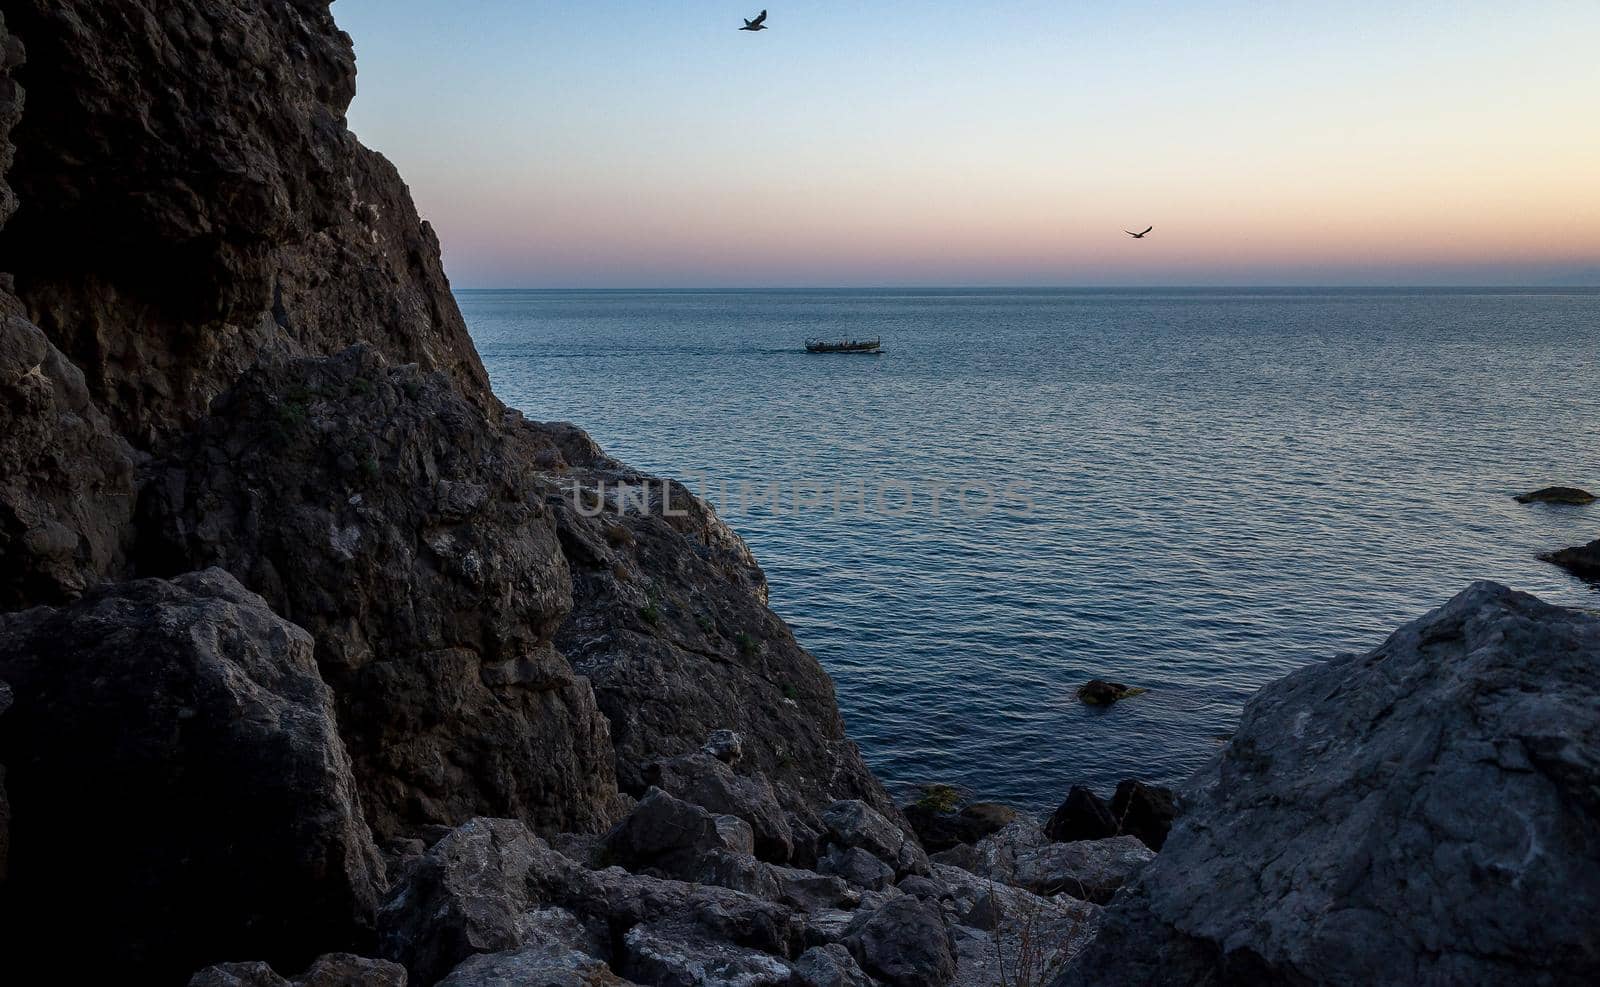 Rocky coast and a pleasure boat with tourists in the sea on a warm summer evening